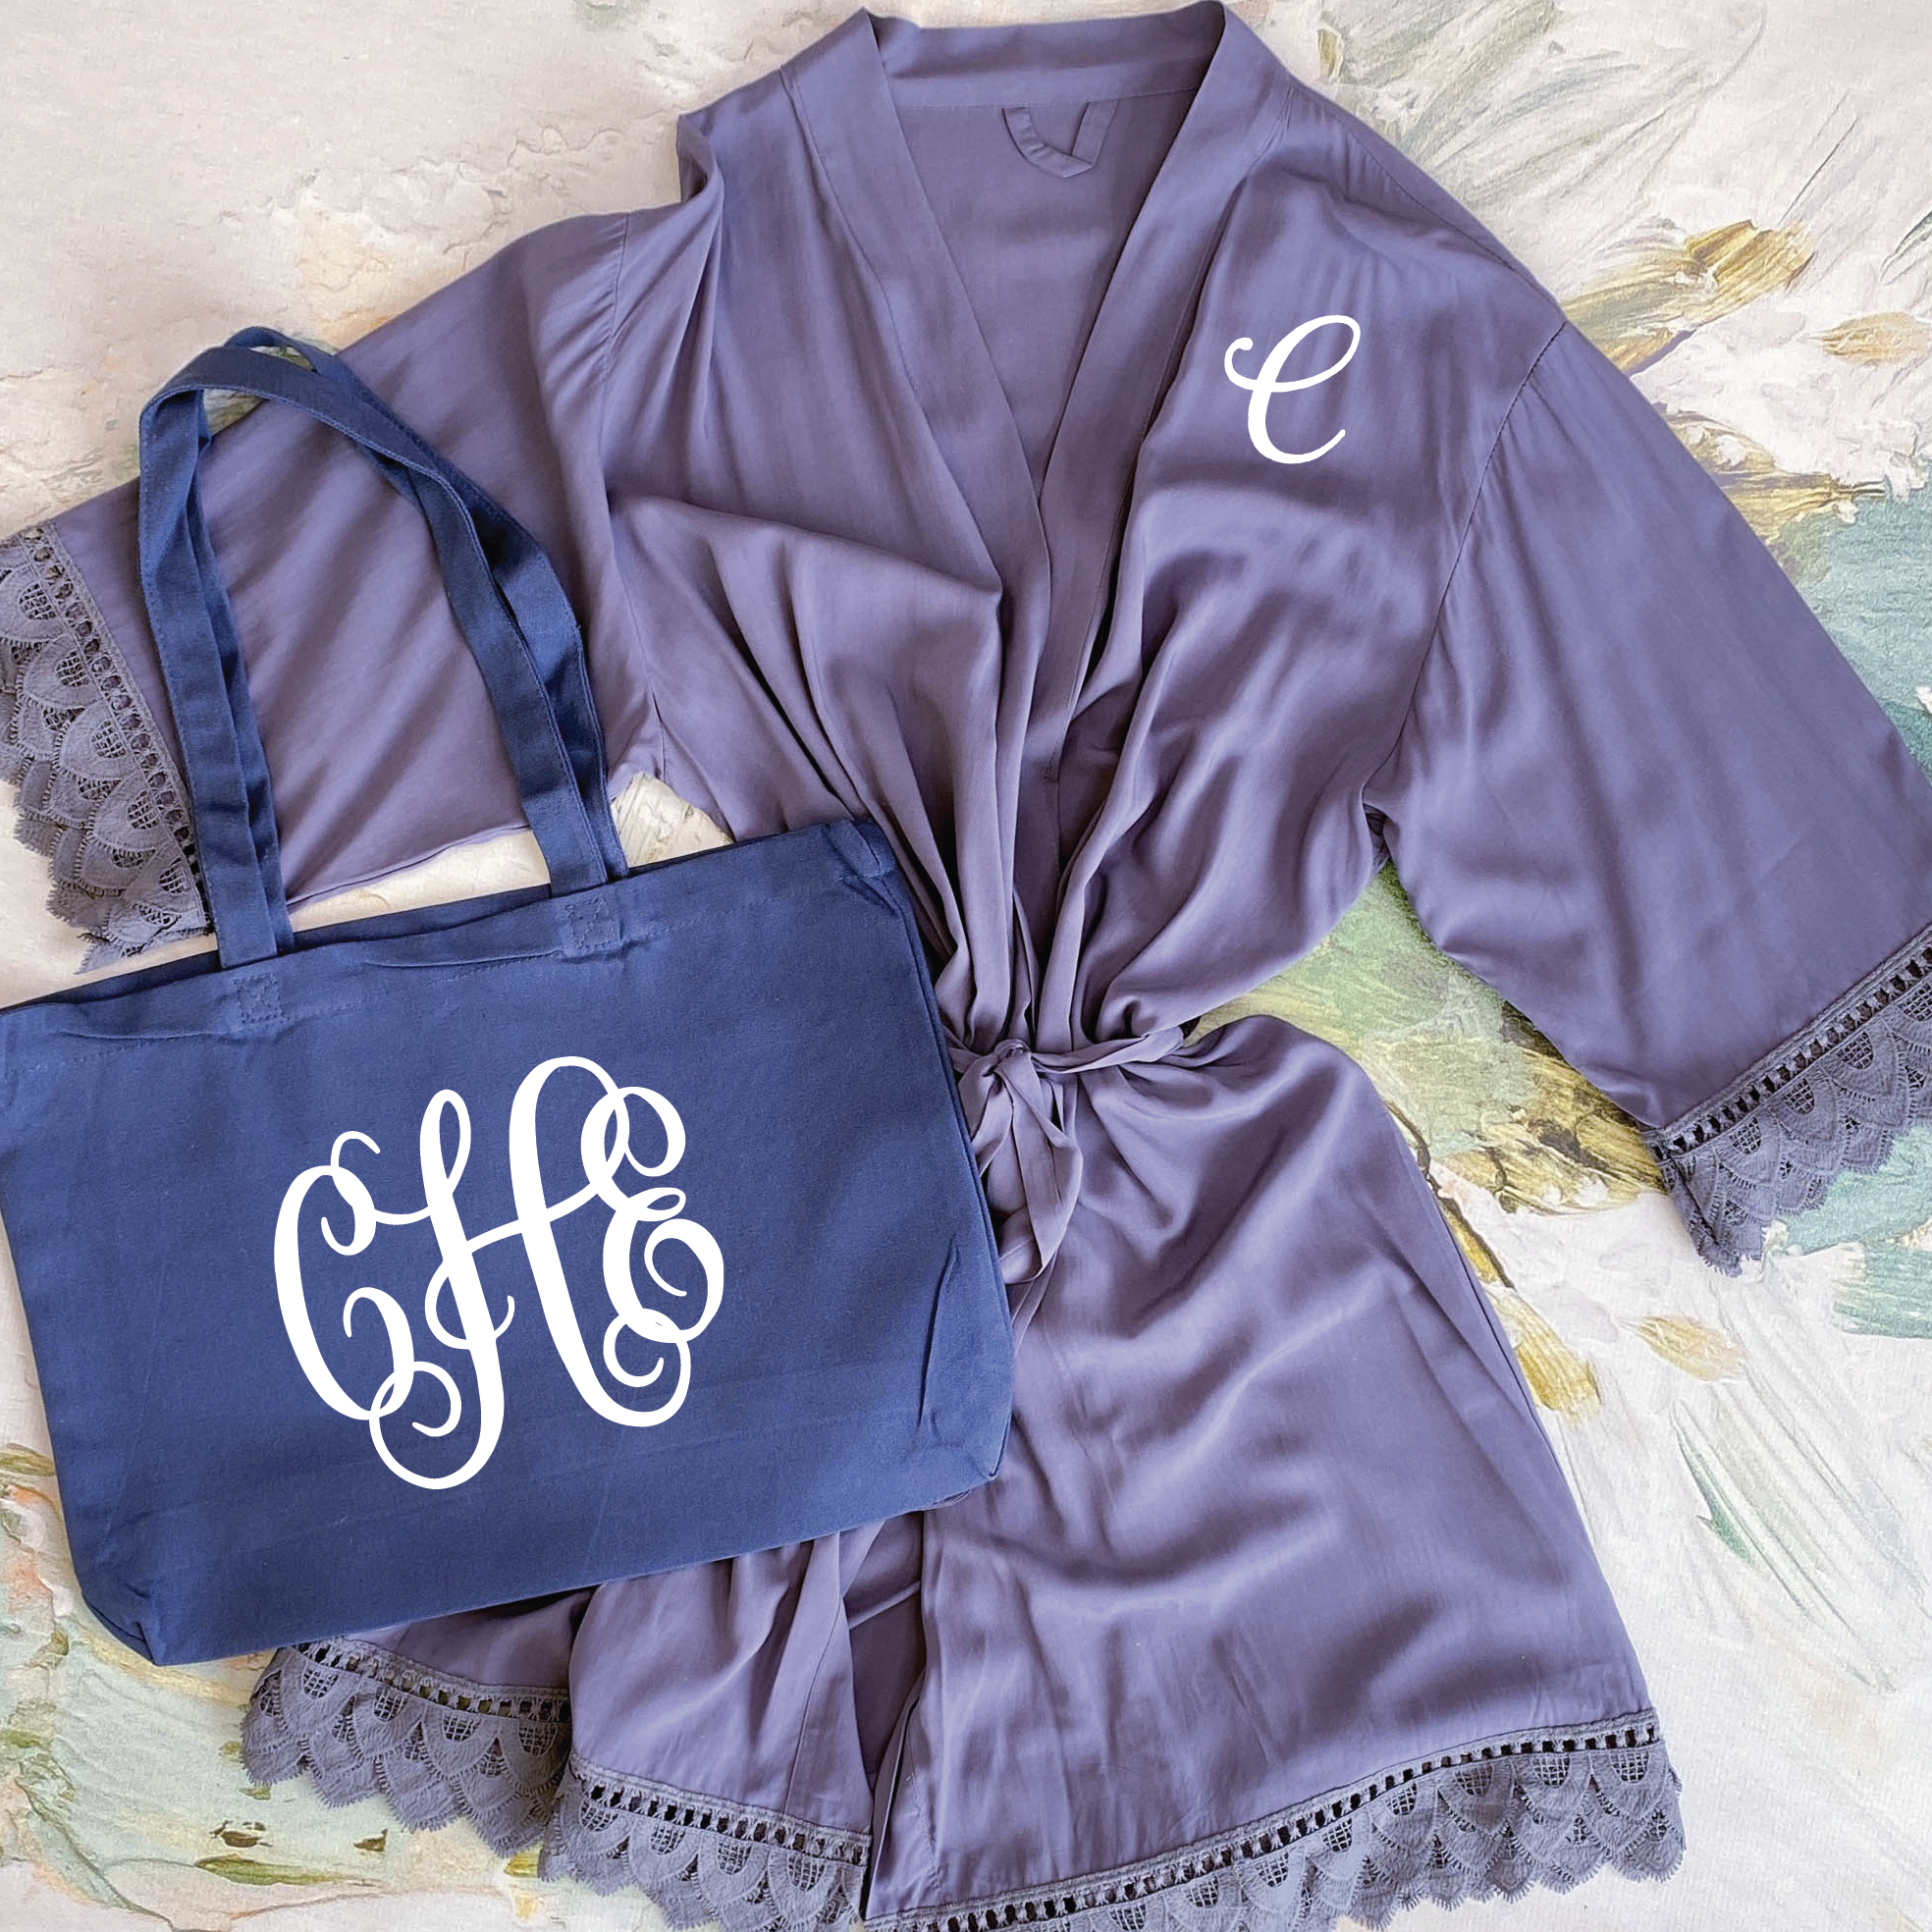 Monogrammed Tote Bags | Navy Blue Cotton Tote Bag with Vine Monogram in White